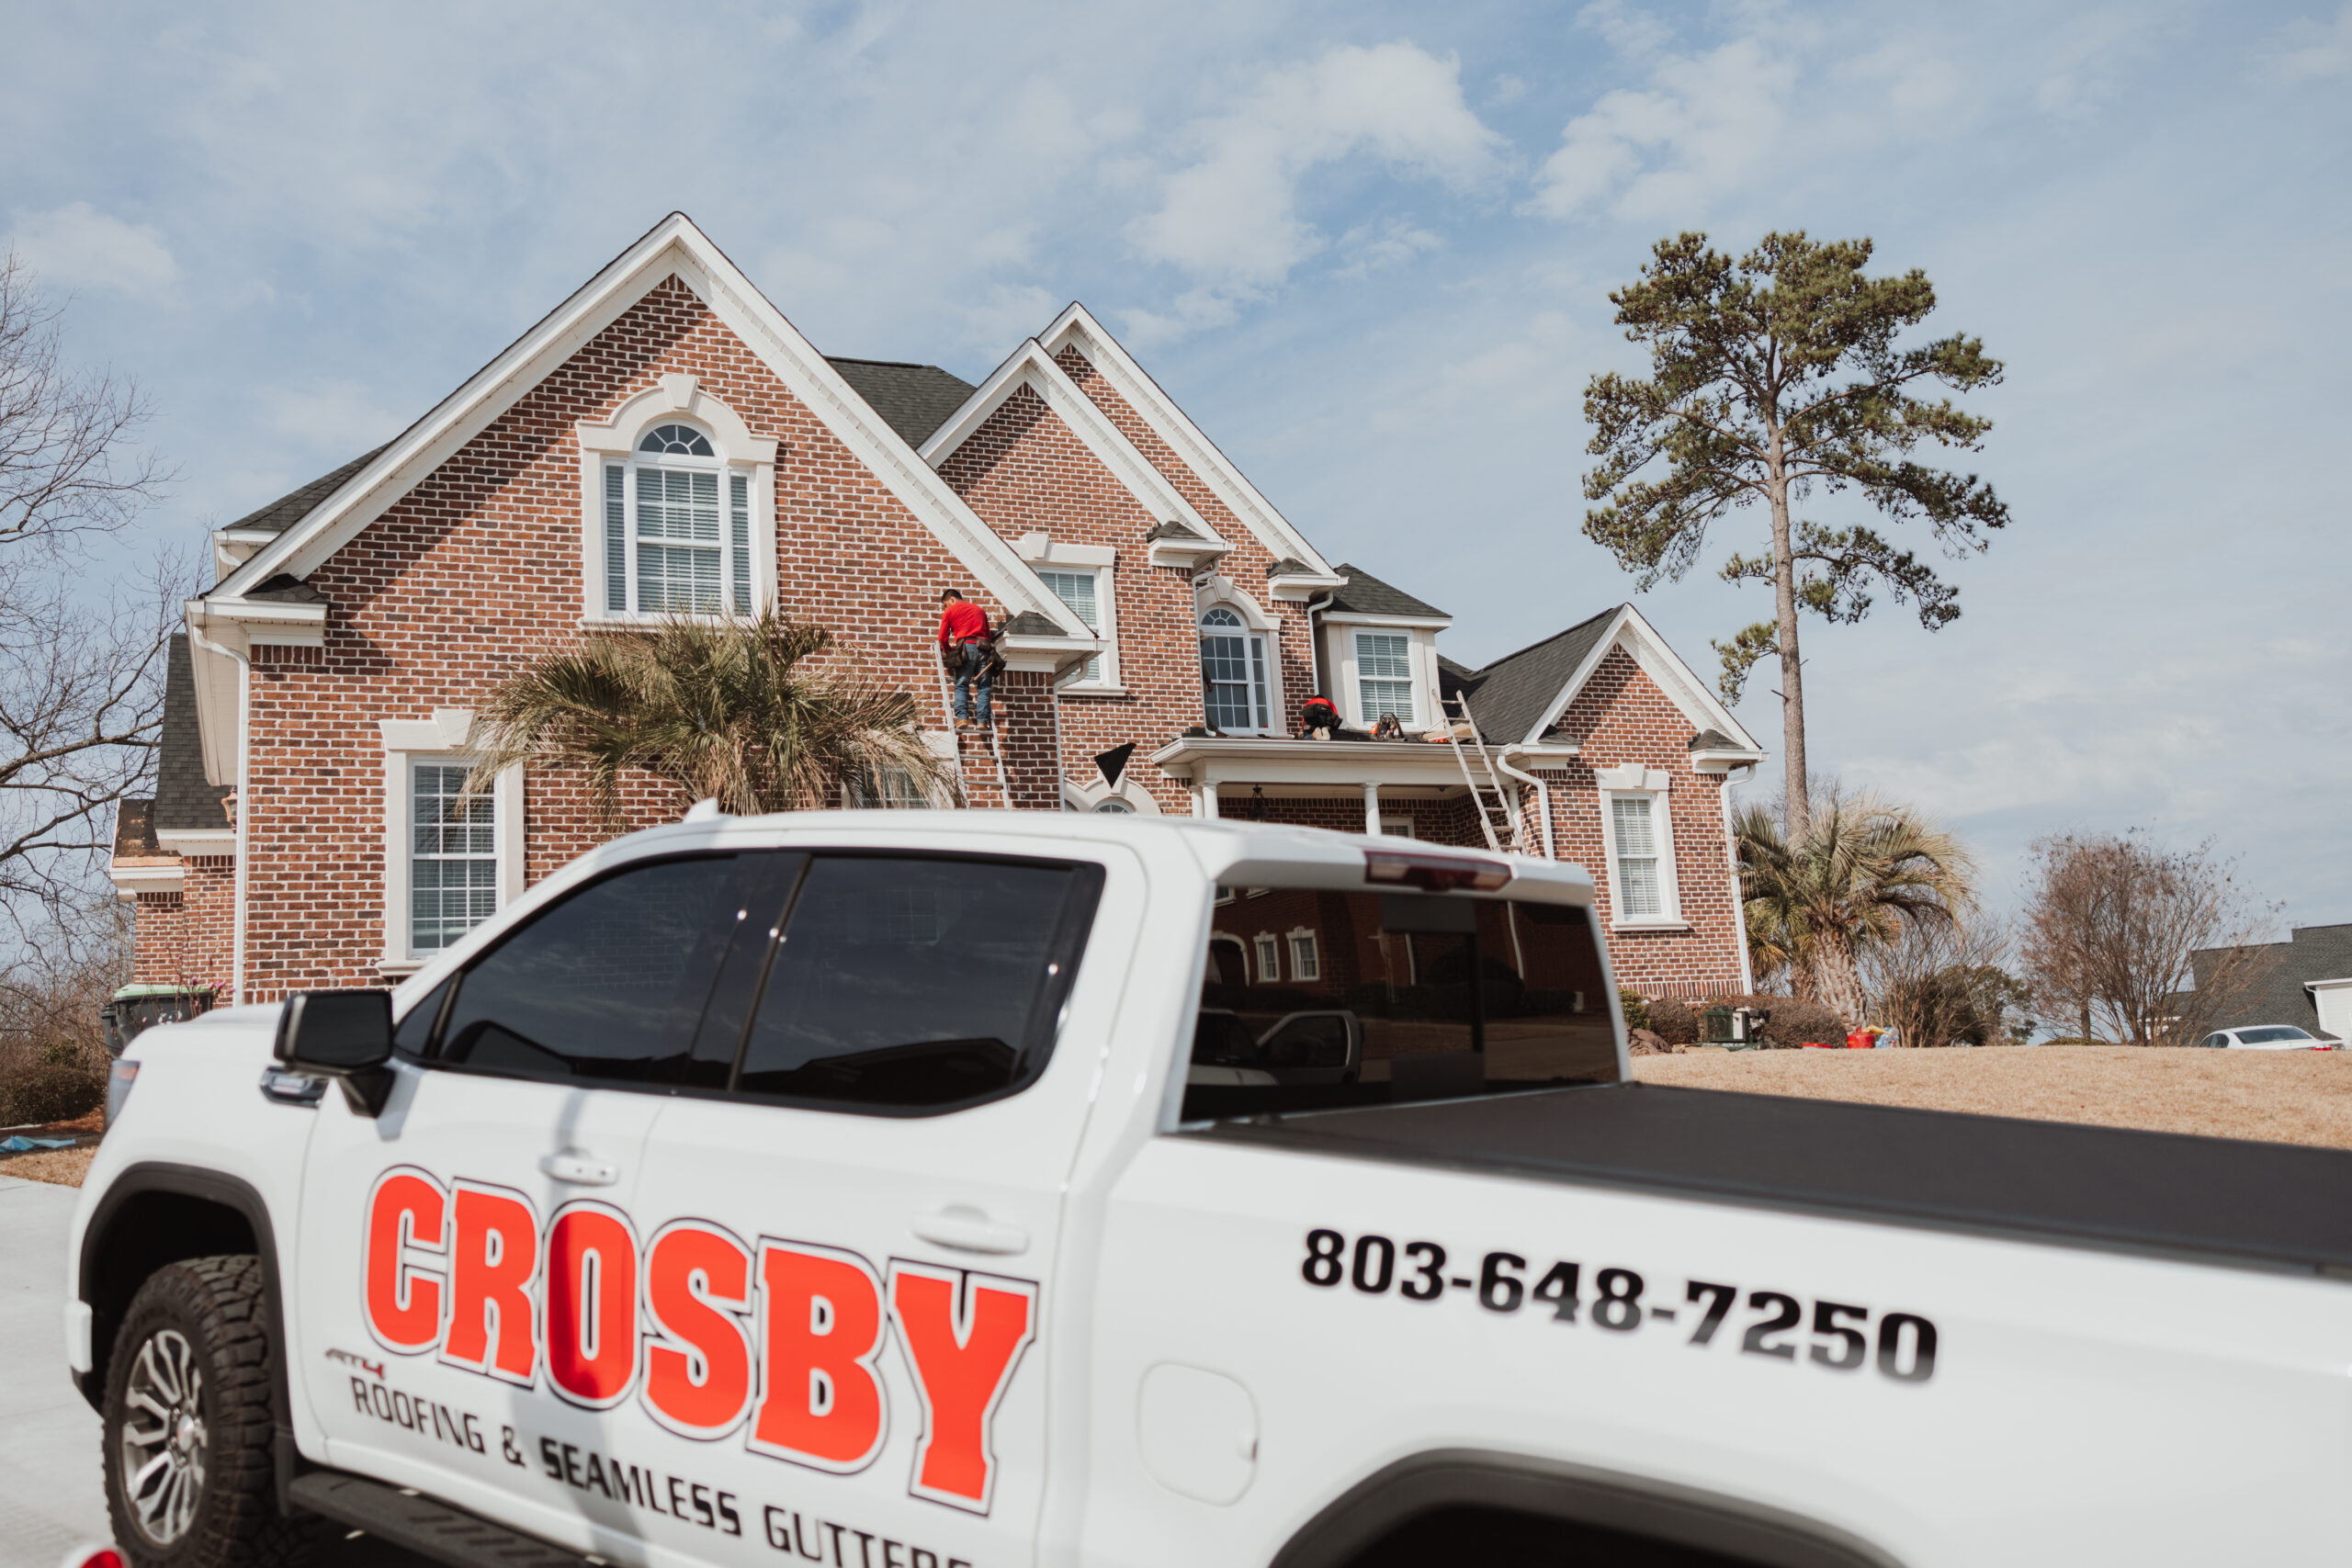 Crosby Roofing and Seamless gutters